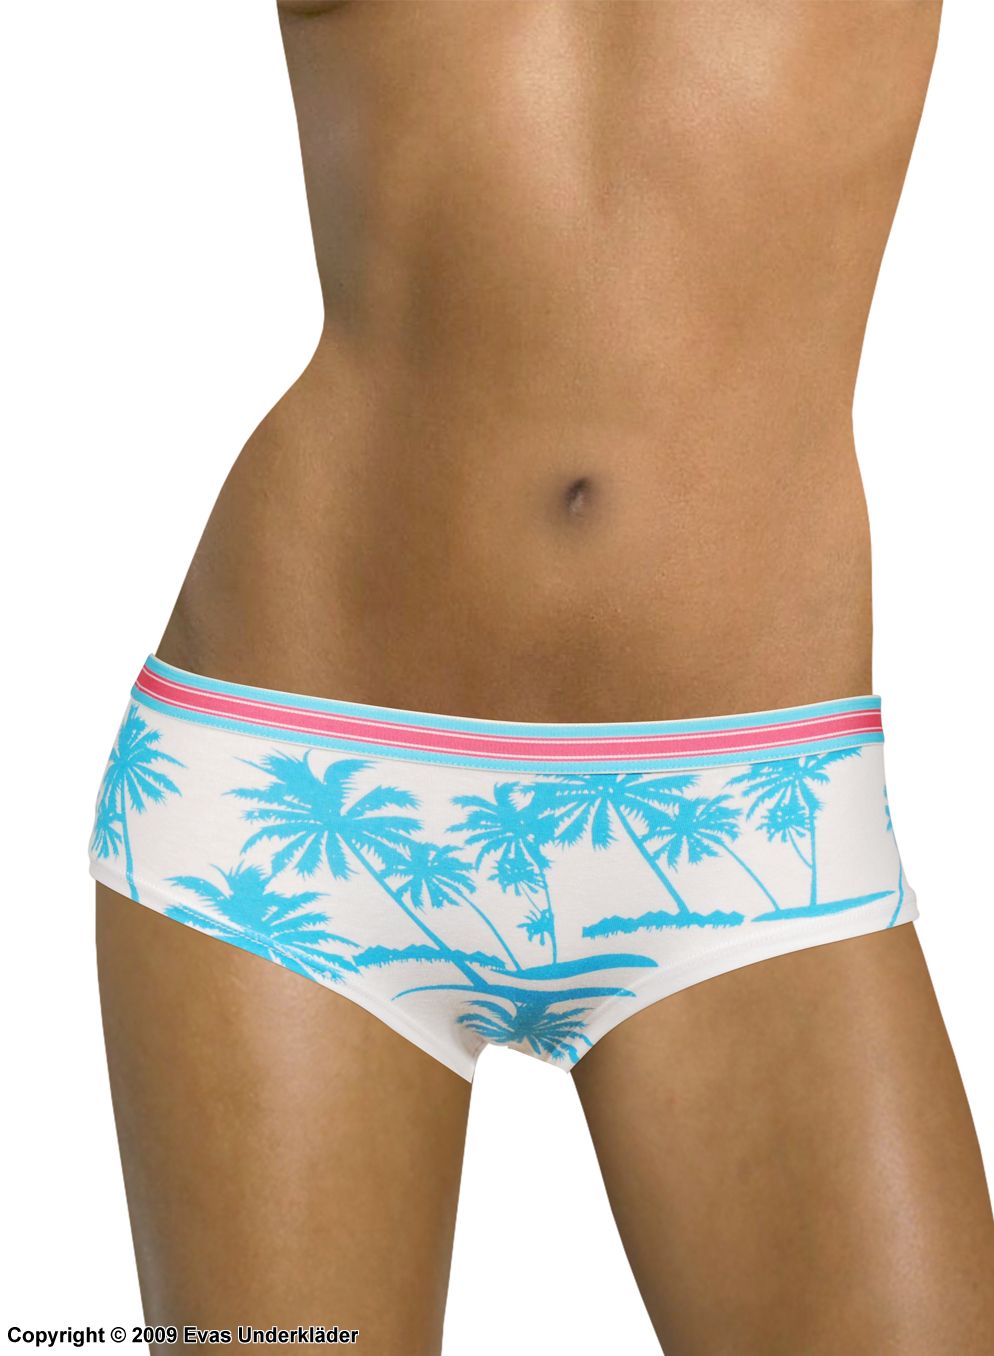 Hipster panty with turquoise palms